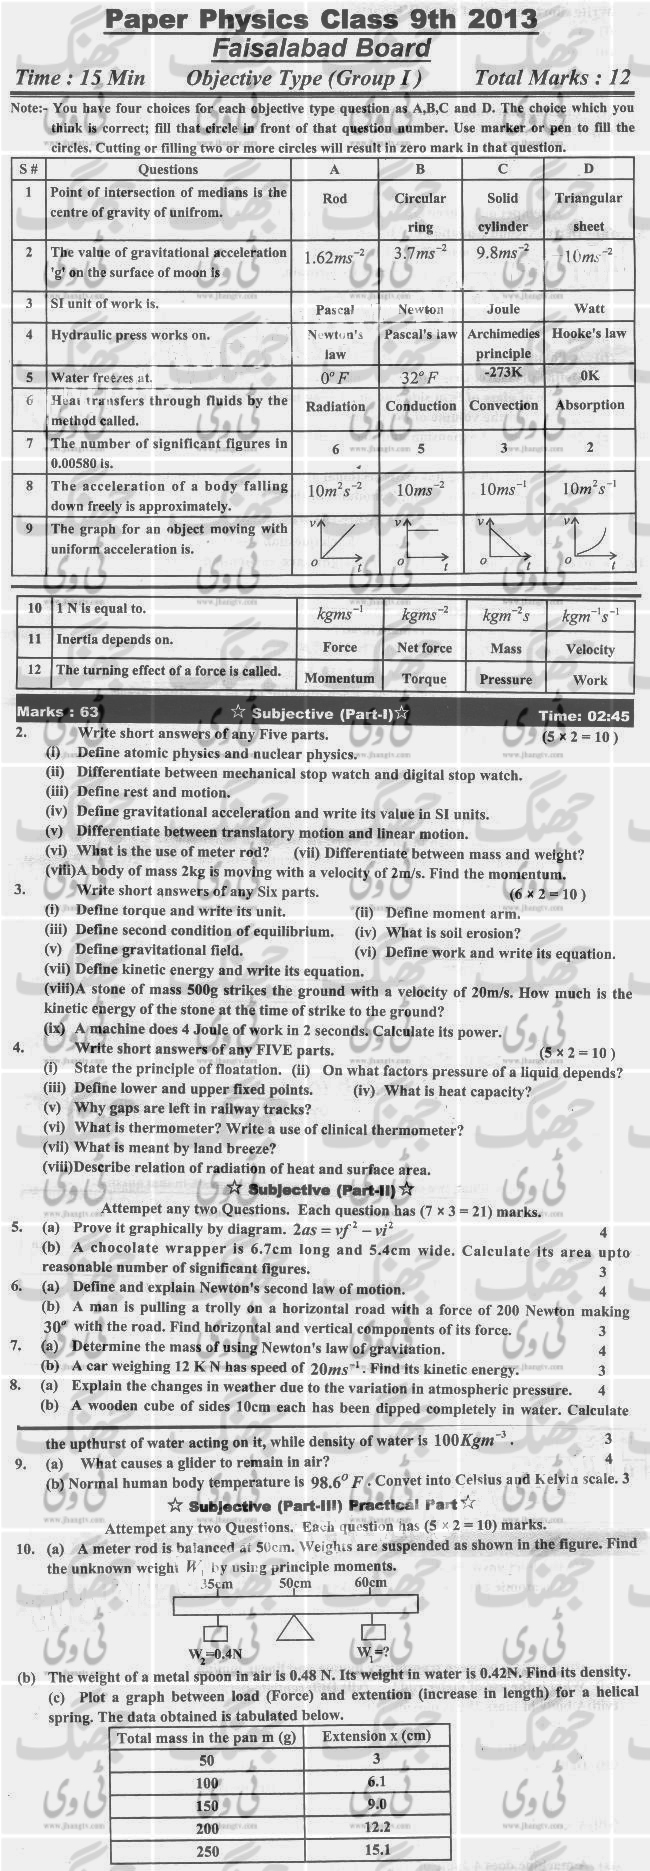 Past-Papers-2013-Faisalabad-Board-9th-Class-Physics-Group-1-English-Version copy